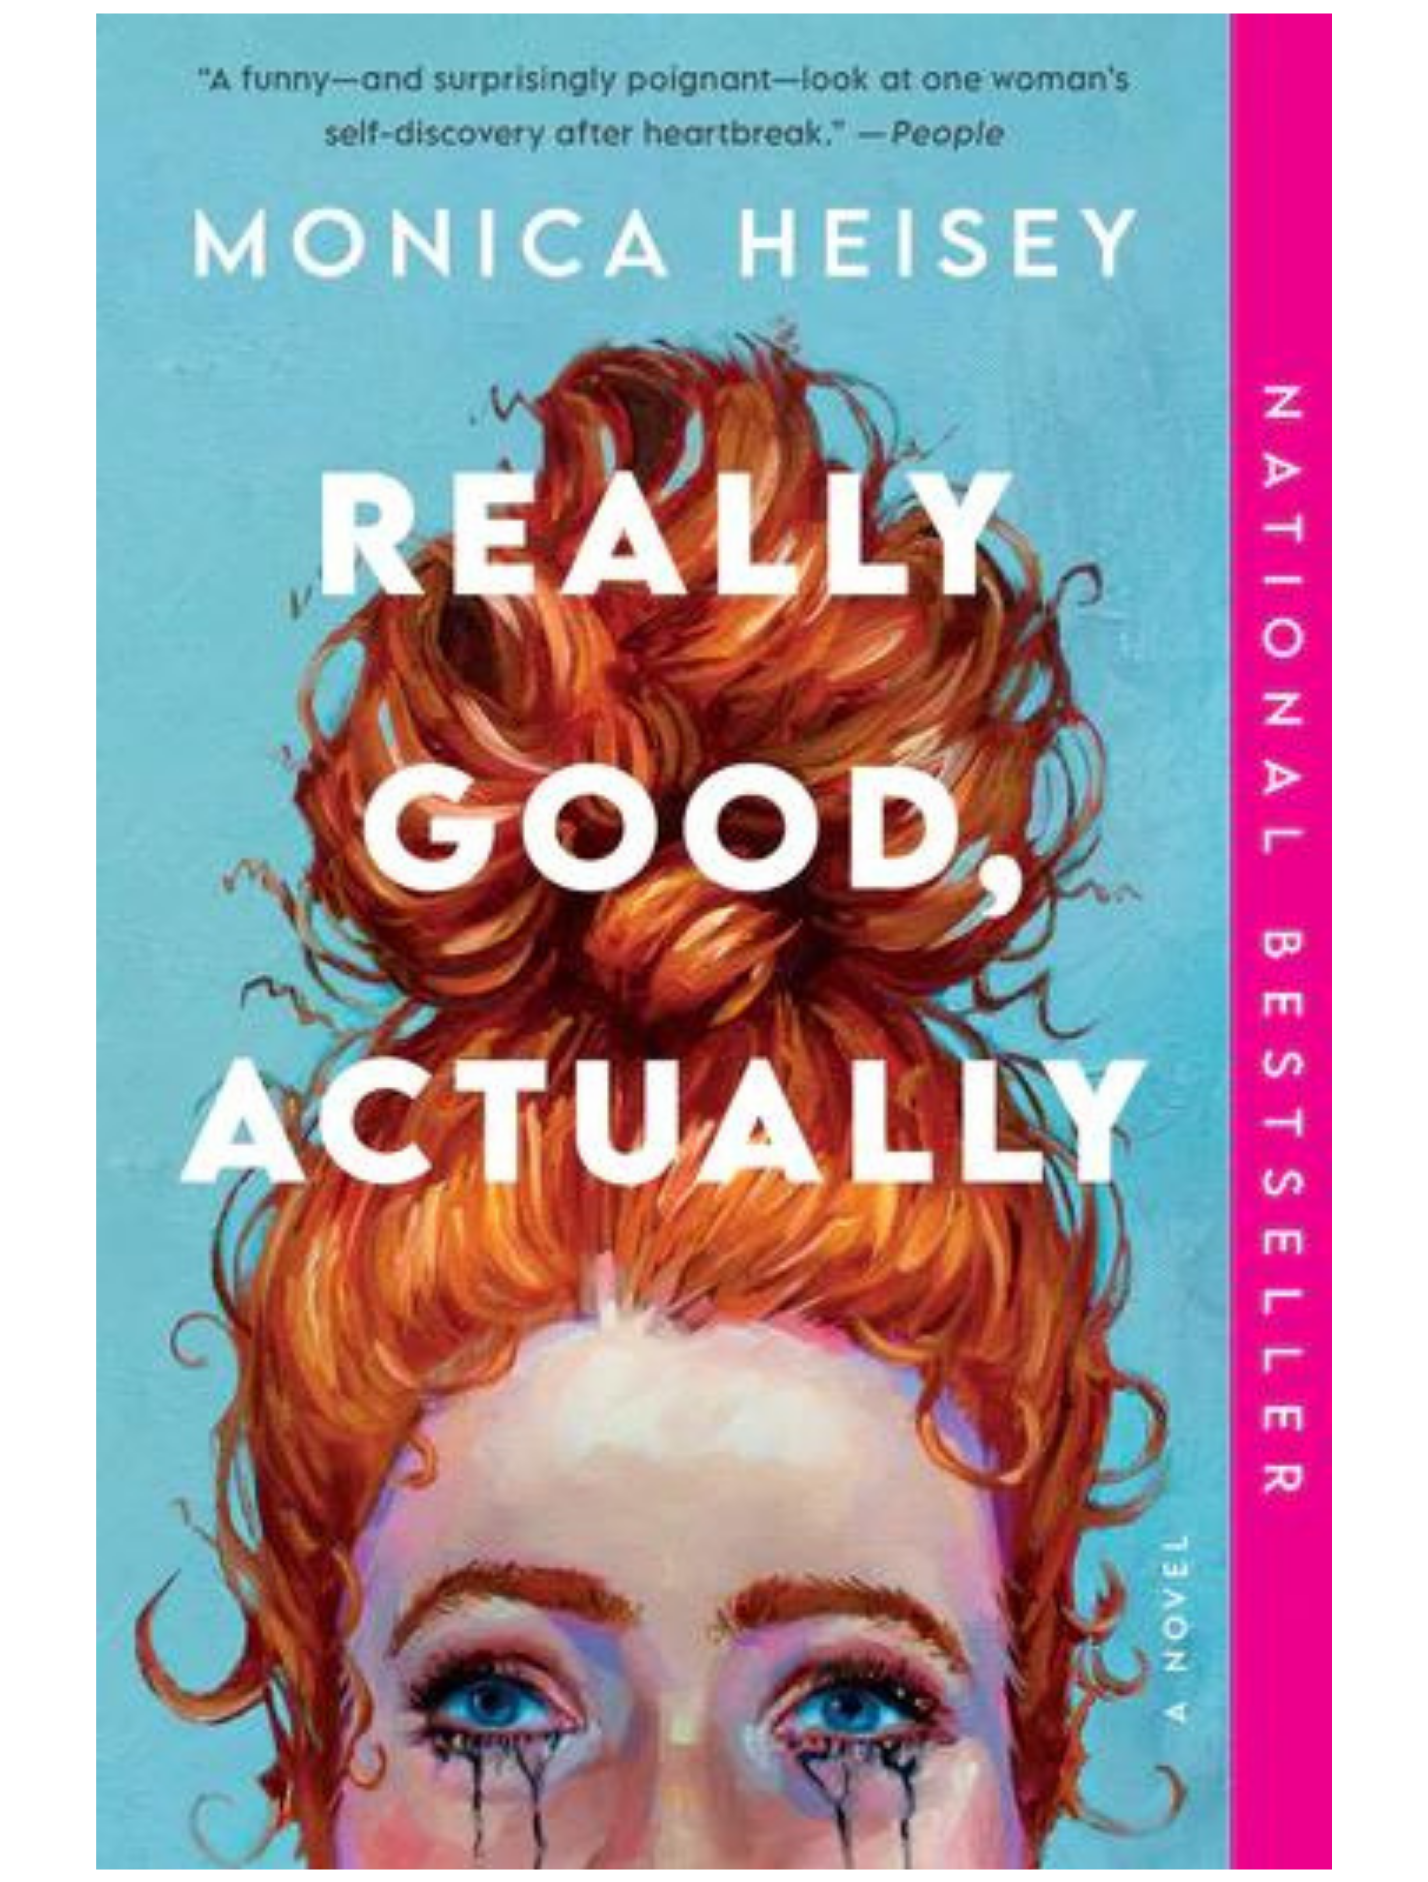 Really Good, Actually by Monica Heisey